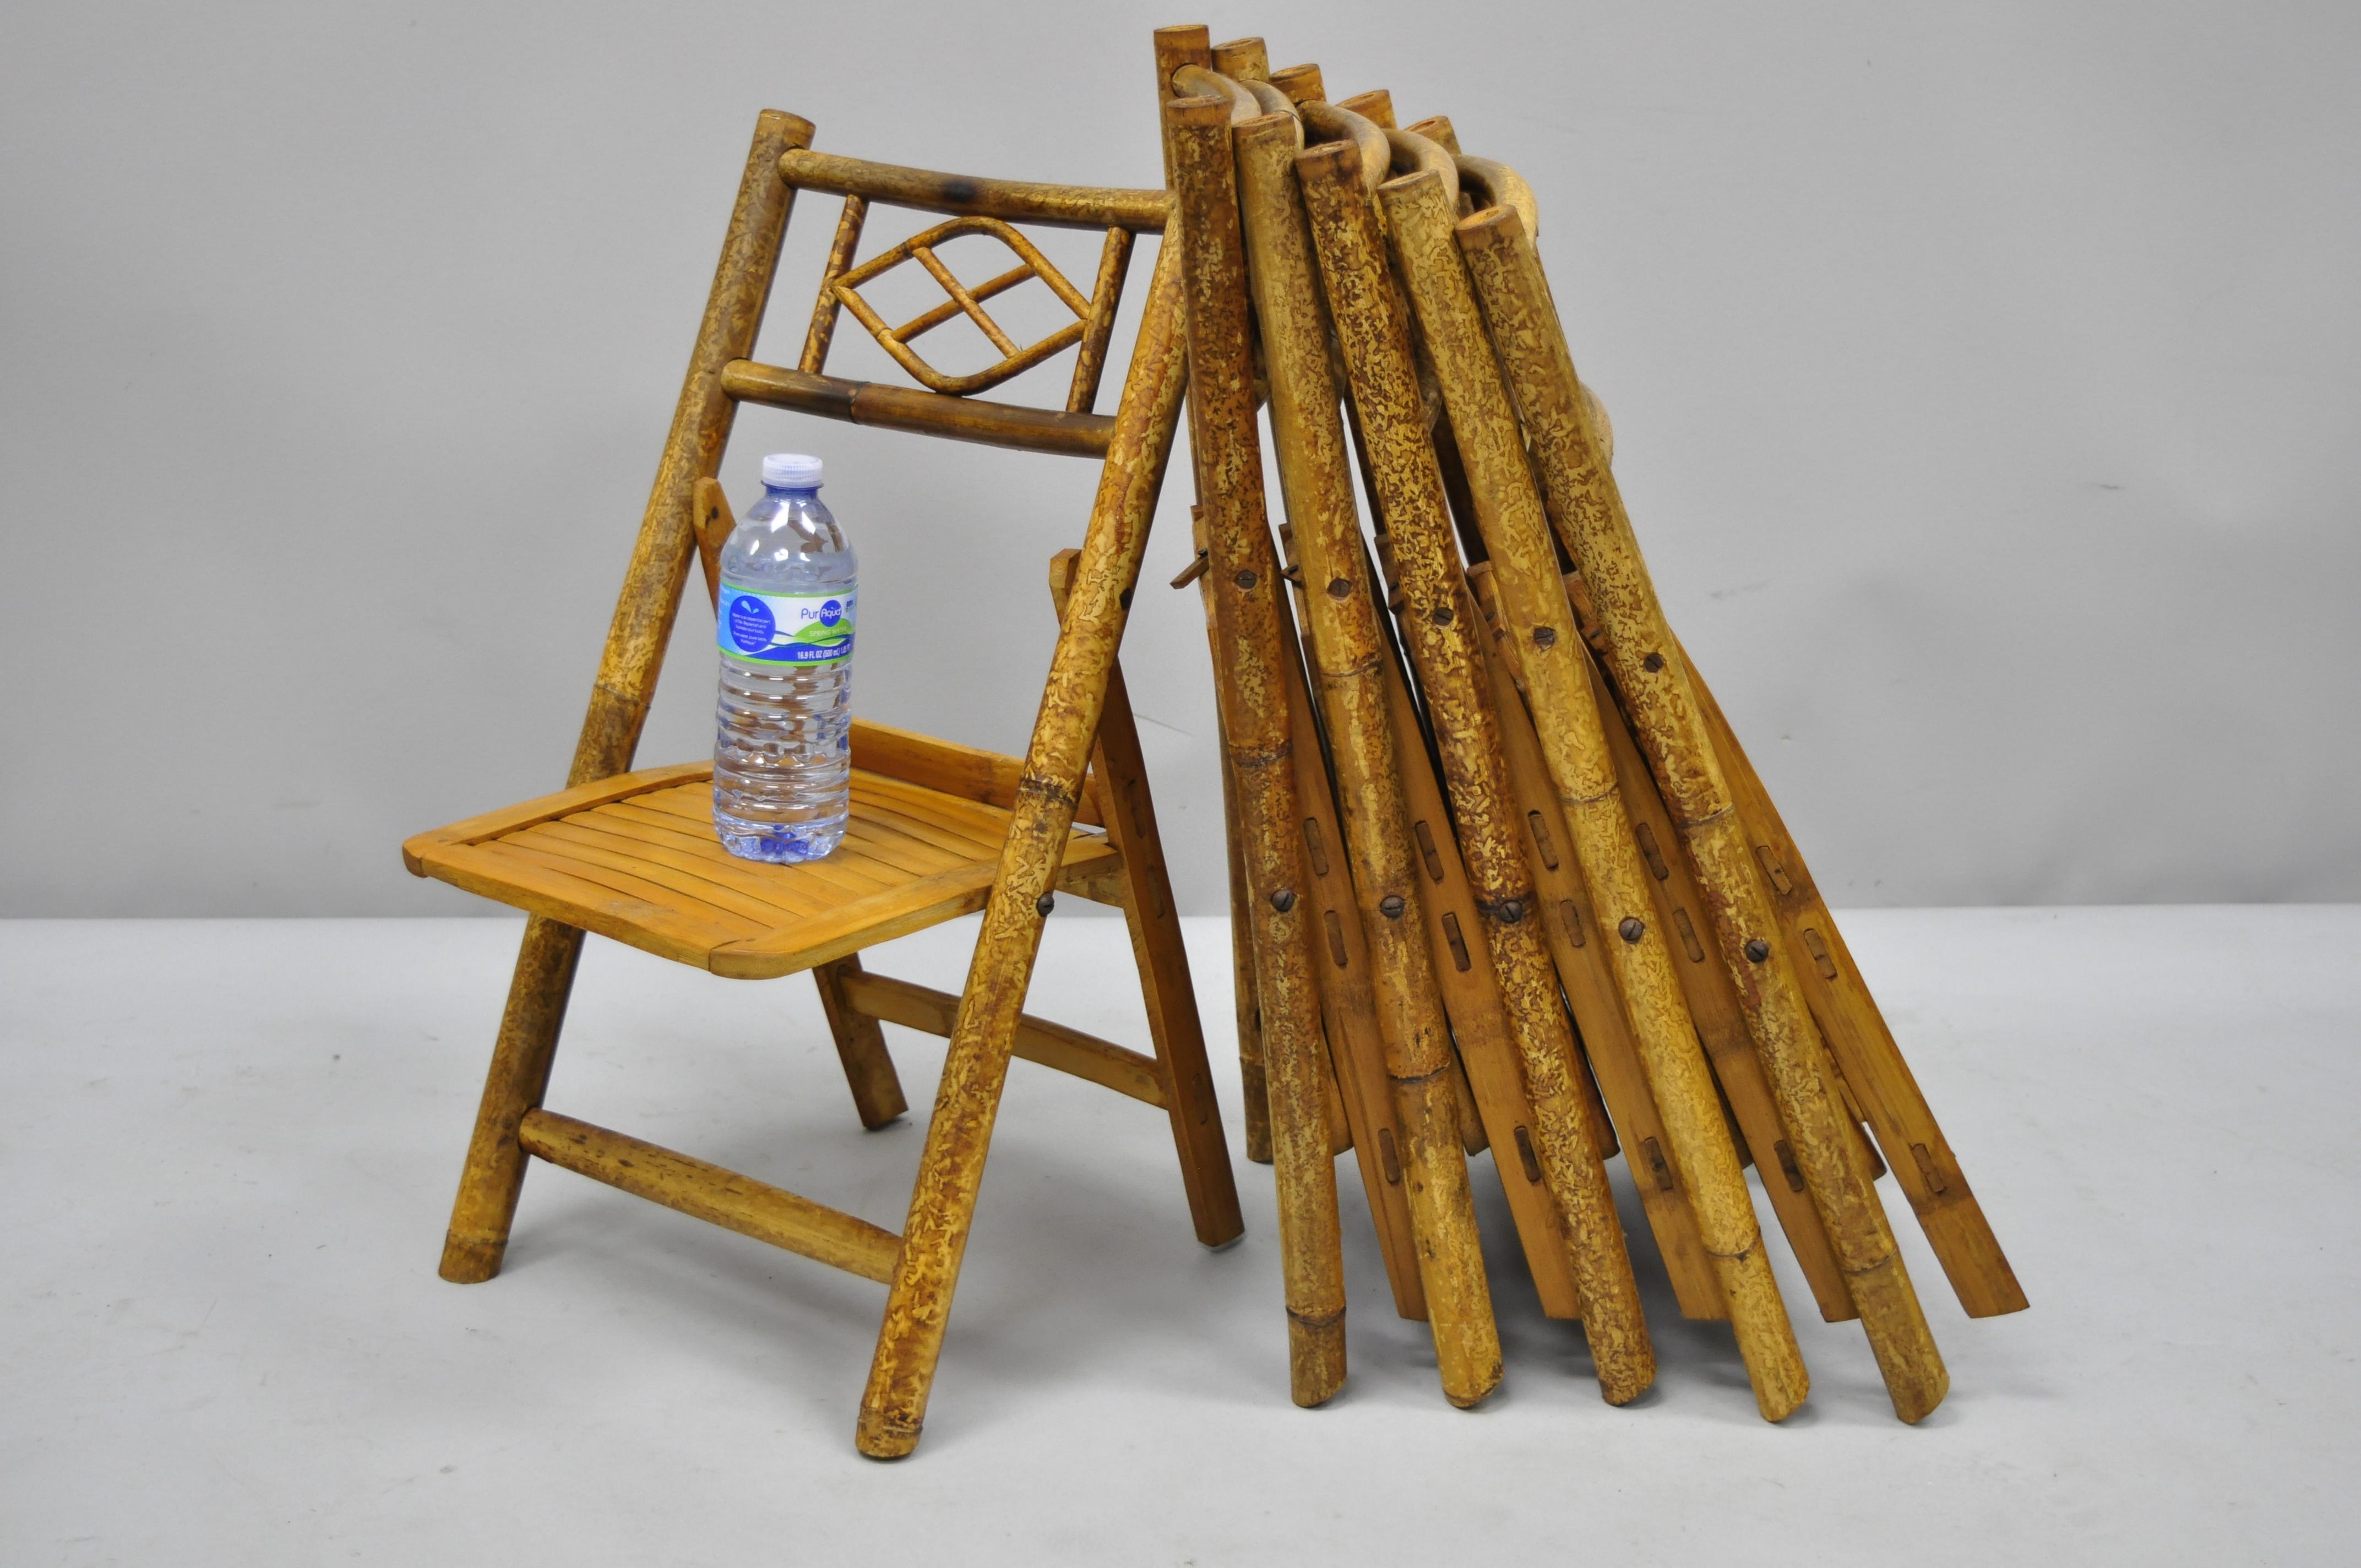 6 vintage children bamboo folding chairs Tiki Rattan cane furniture. (6) children's folding chairs, bamboo wood frames, burnished finish, very nice vintage item, great style and form, circa mid-20th century. Measurements: 23